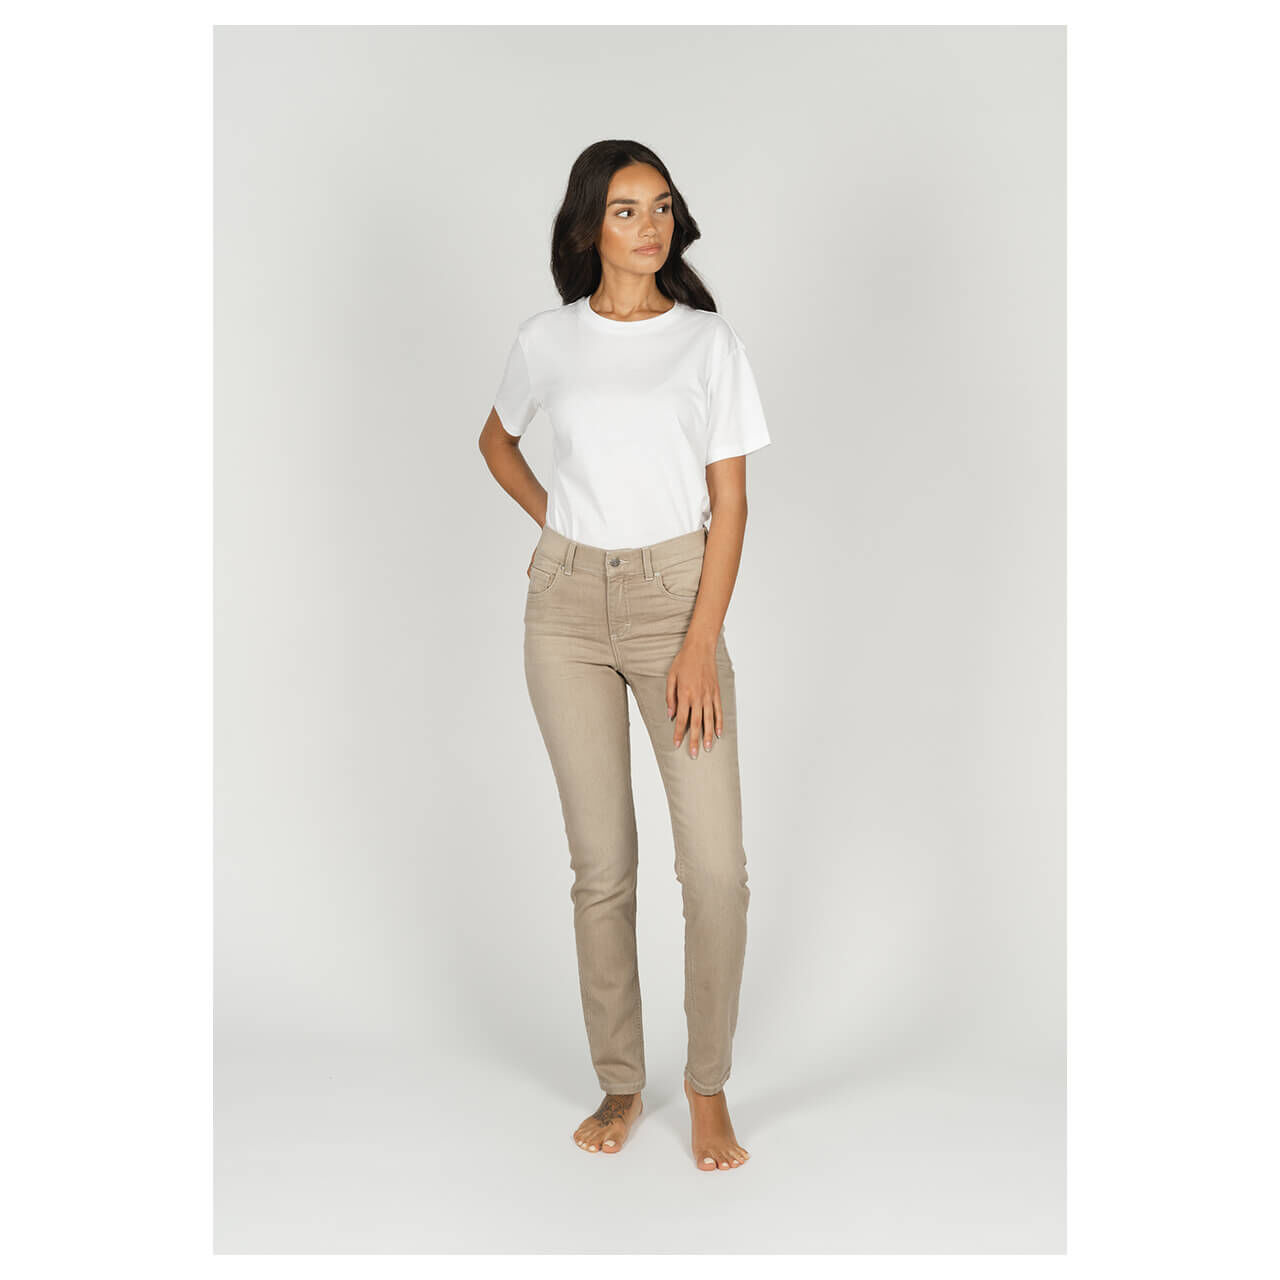 Angels Skinny Jeans cappuccino used